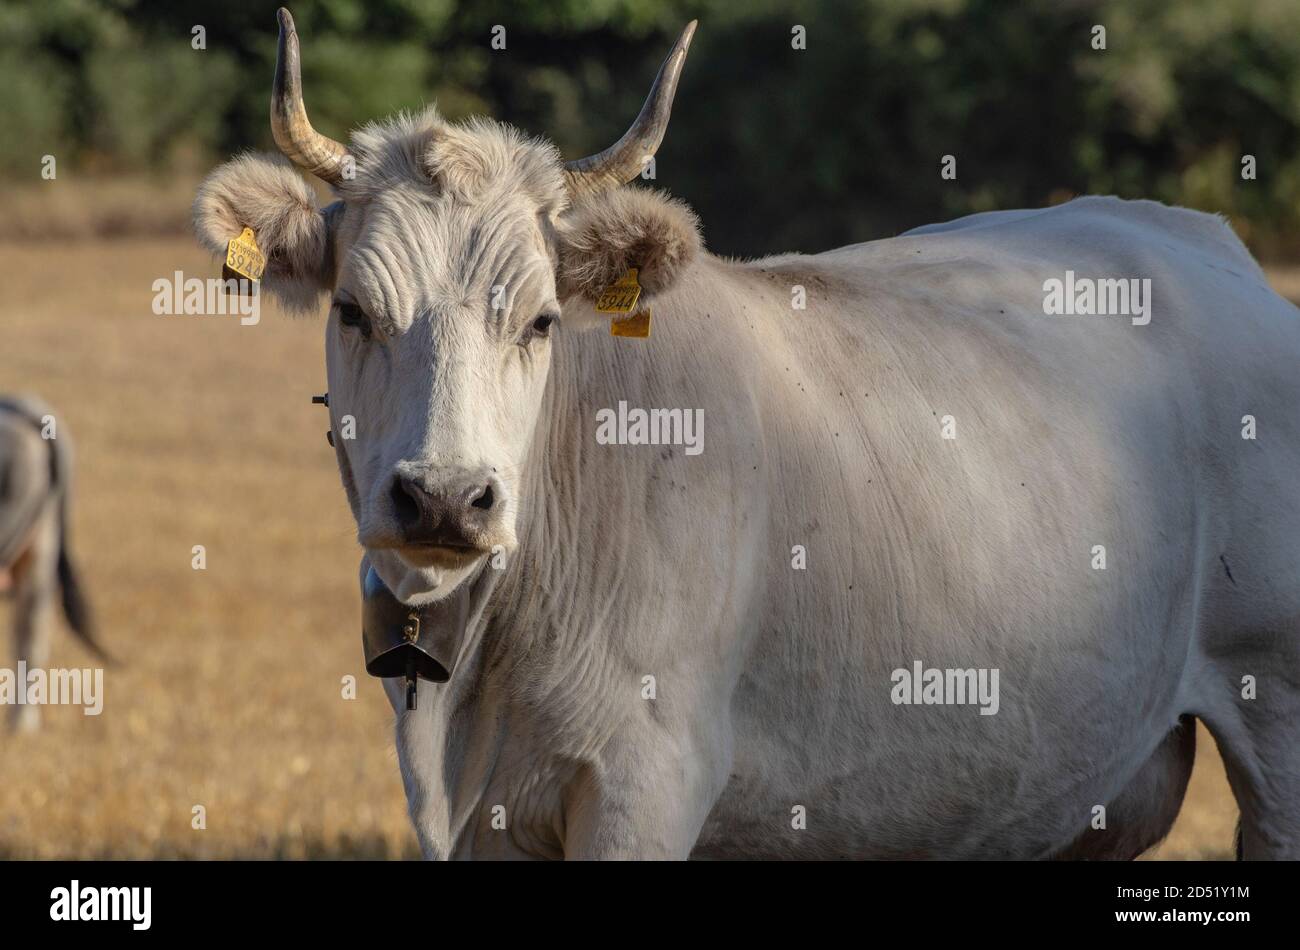 Cow in the foreground in the countryside Stock Photo